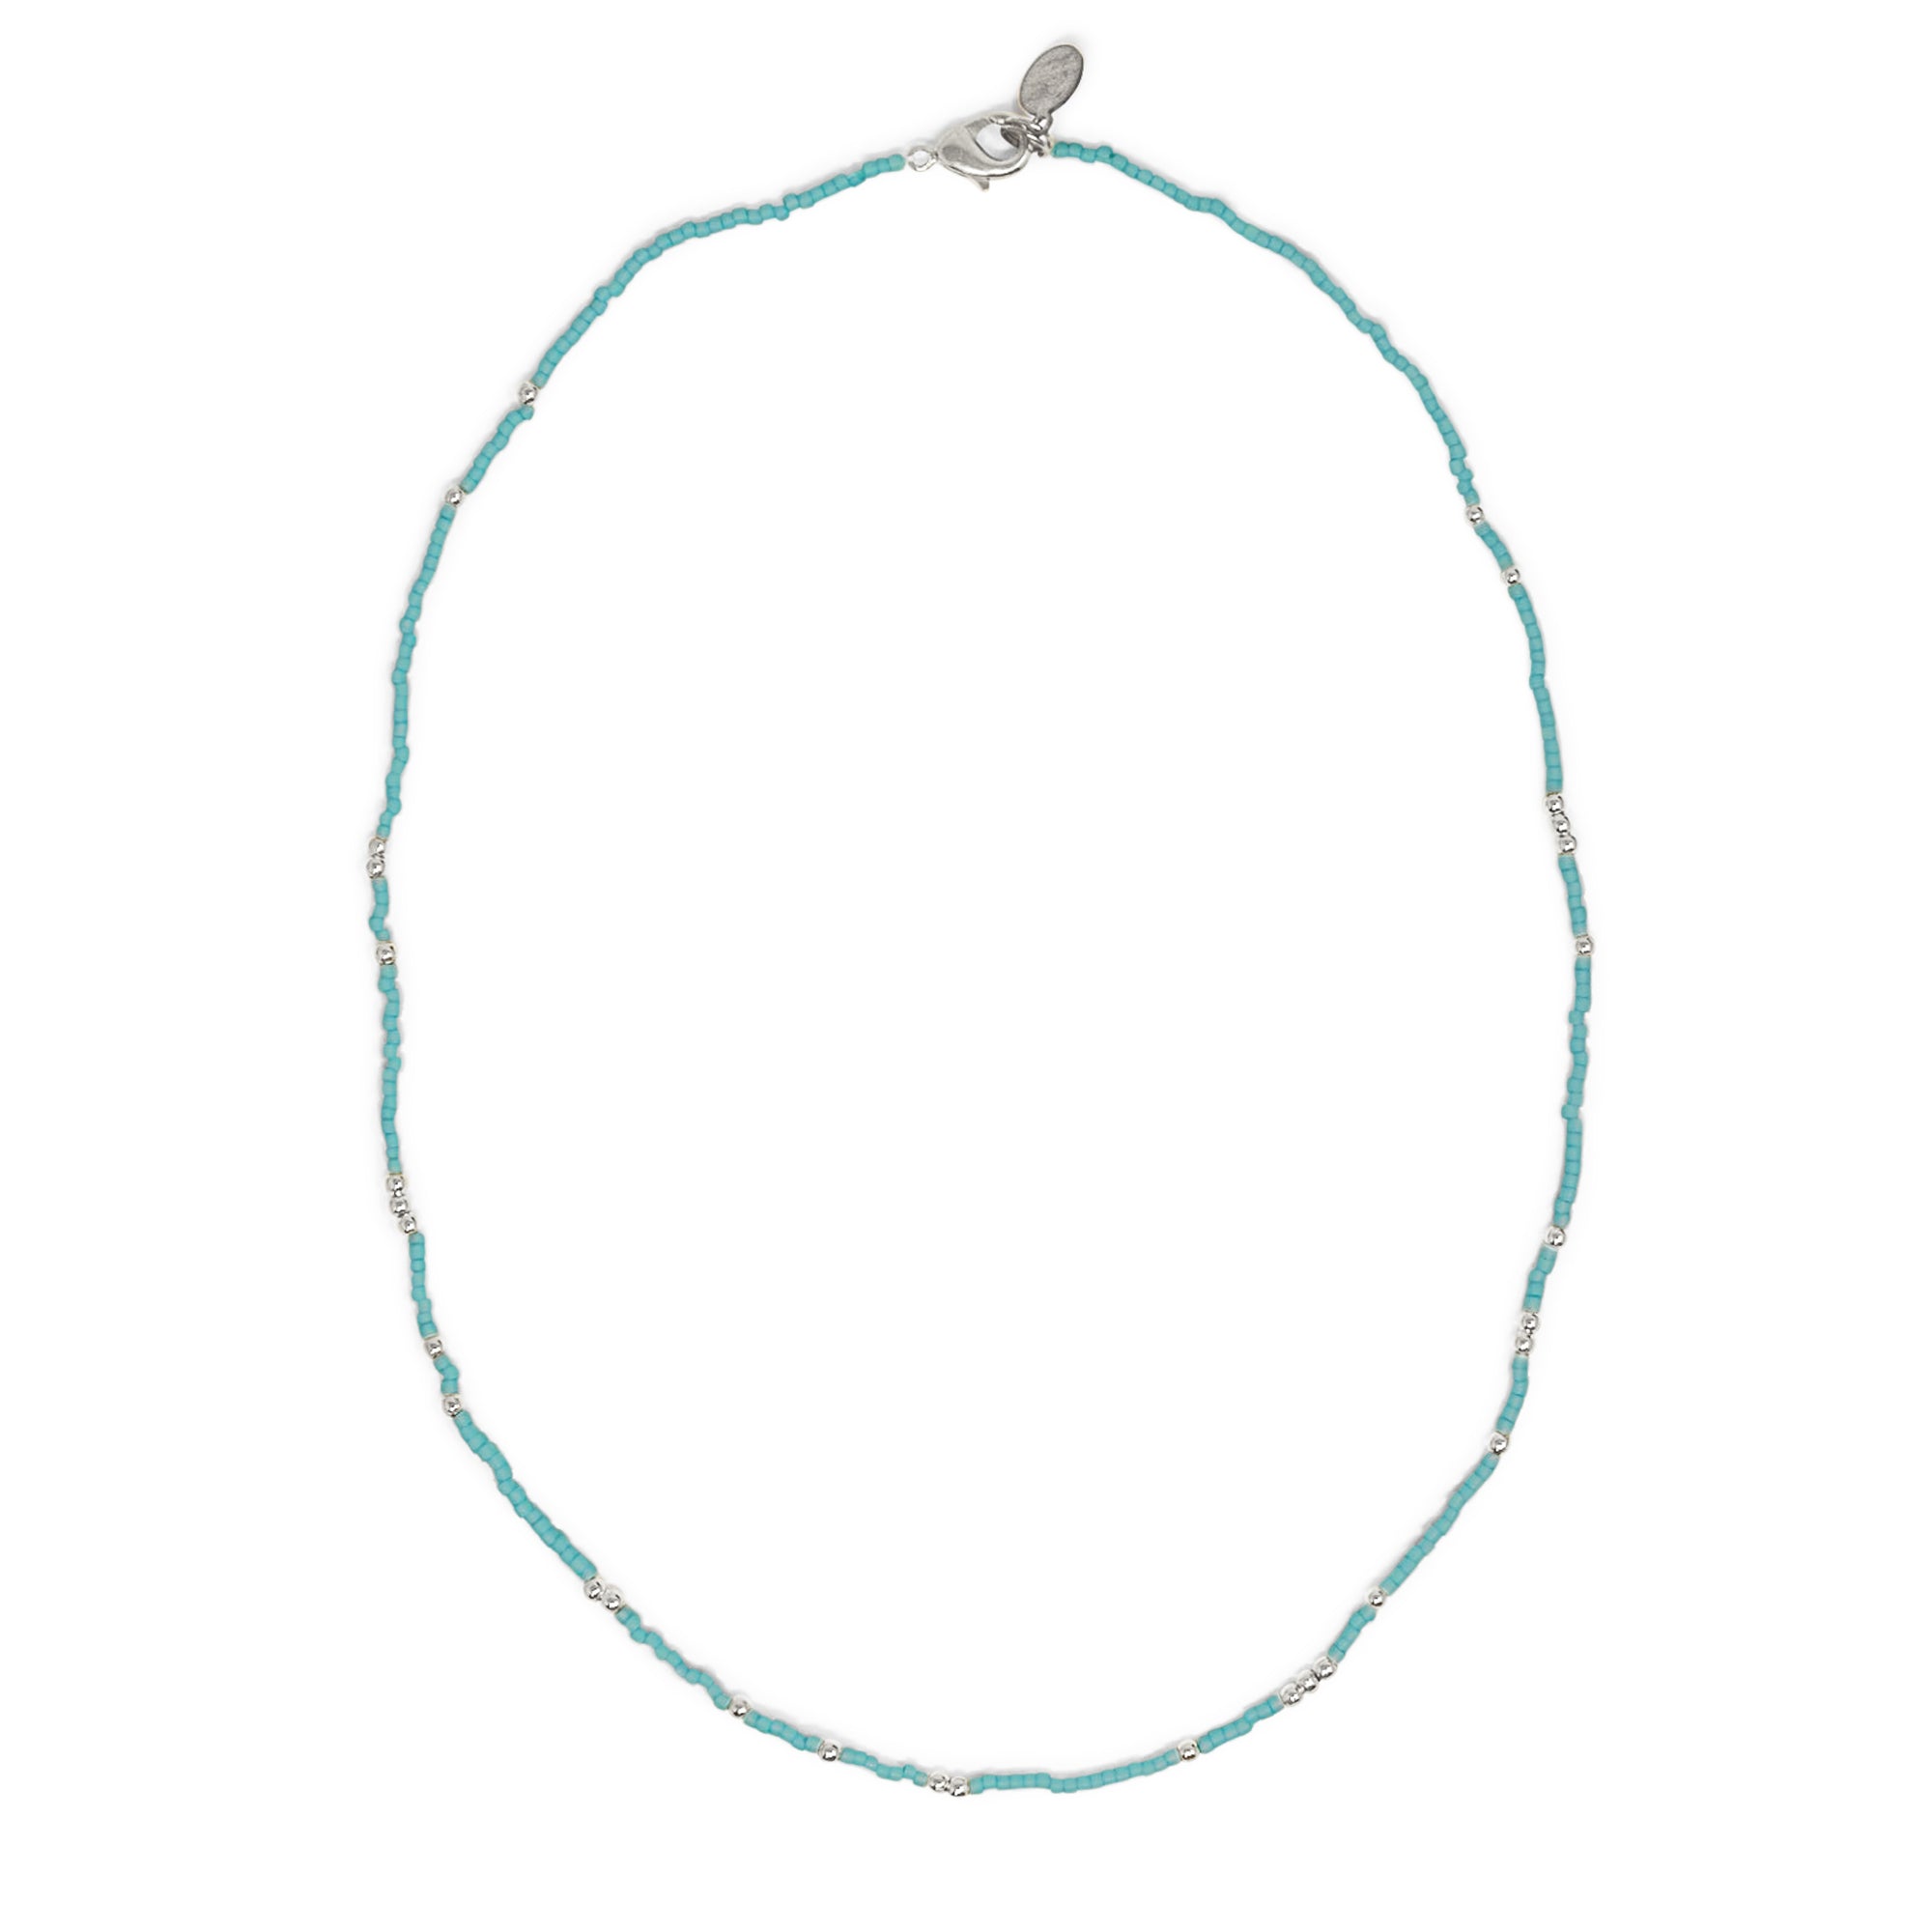 Teal & Silver Bead Necklace